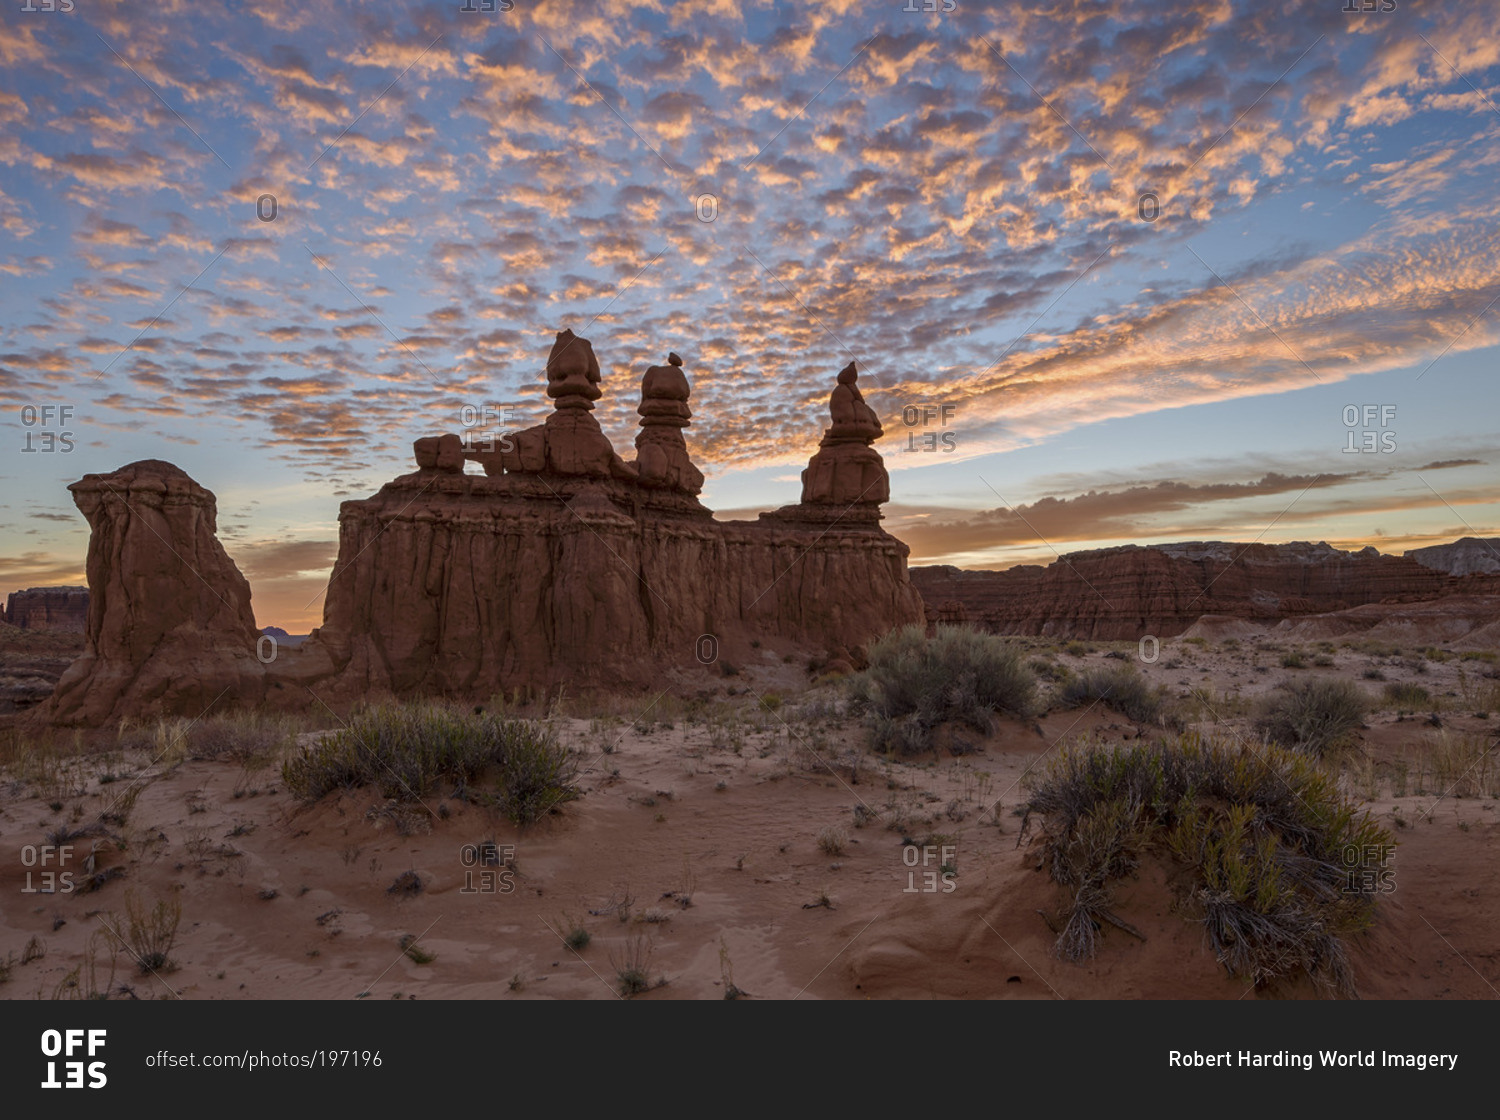 The Three Judges at sunrise in Goblin Valley State Park, Utah, United States of America